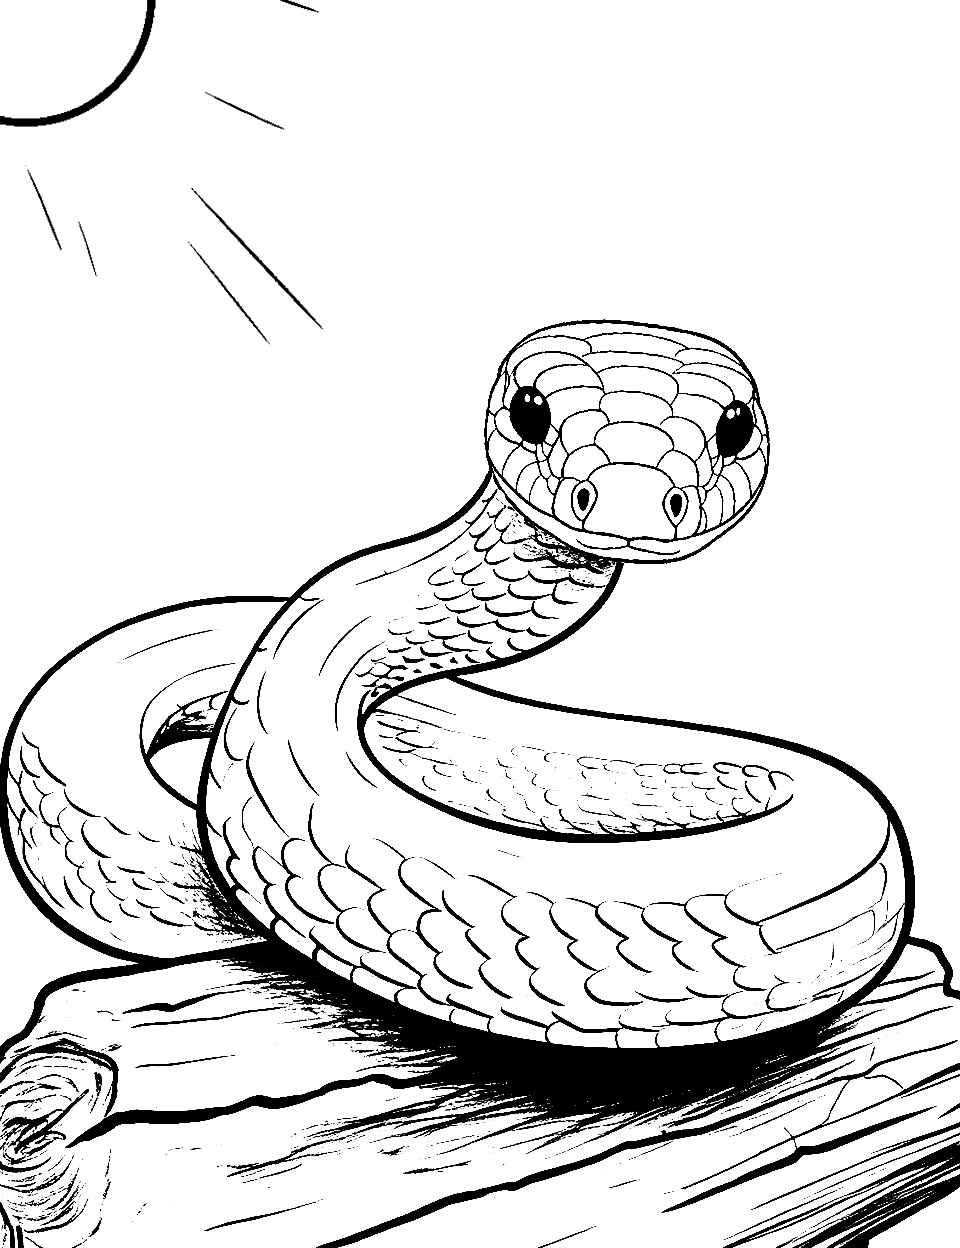 Basking on a Log Coloring Page - A snake sunbathing on a fallen log.